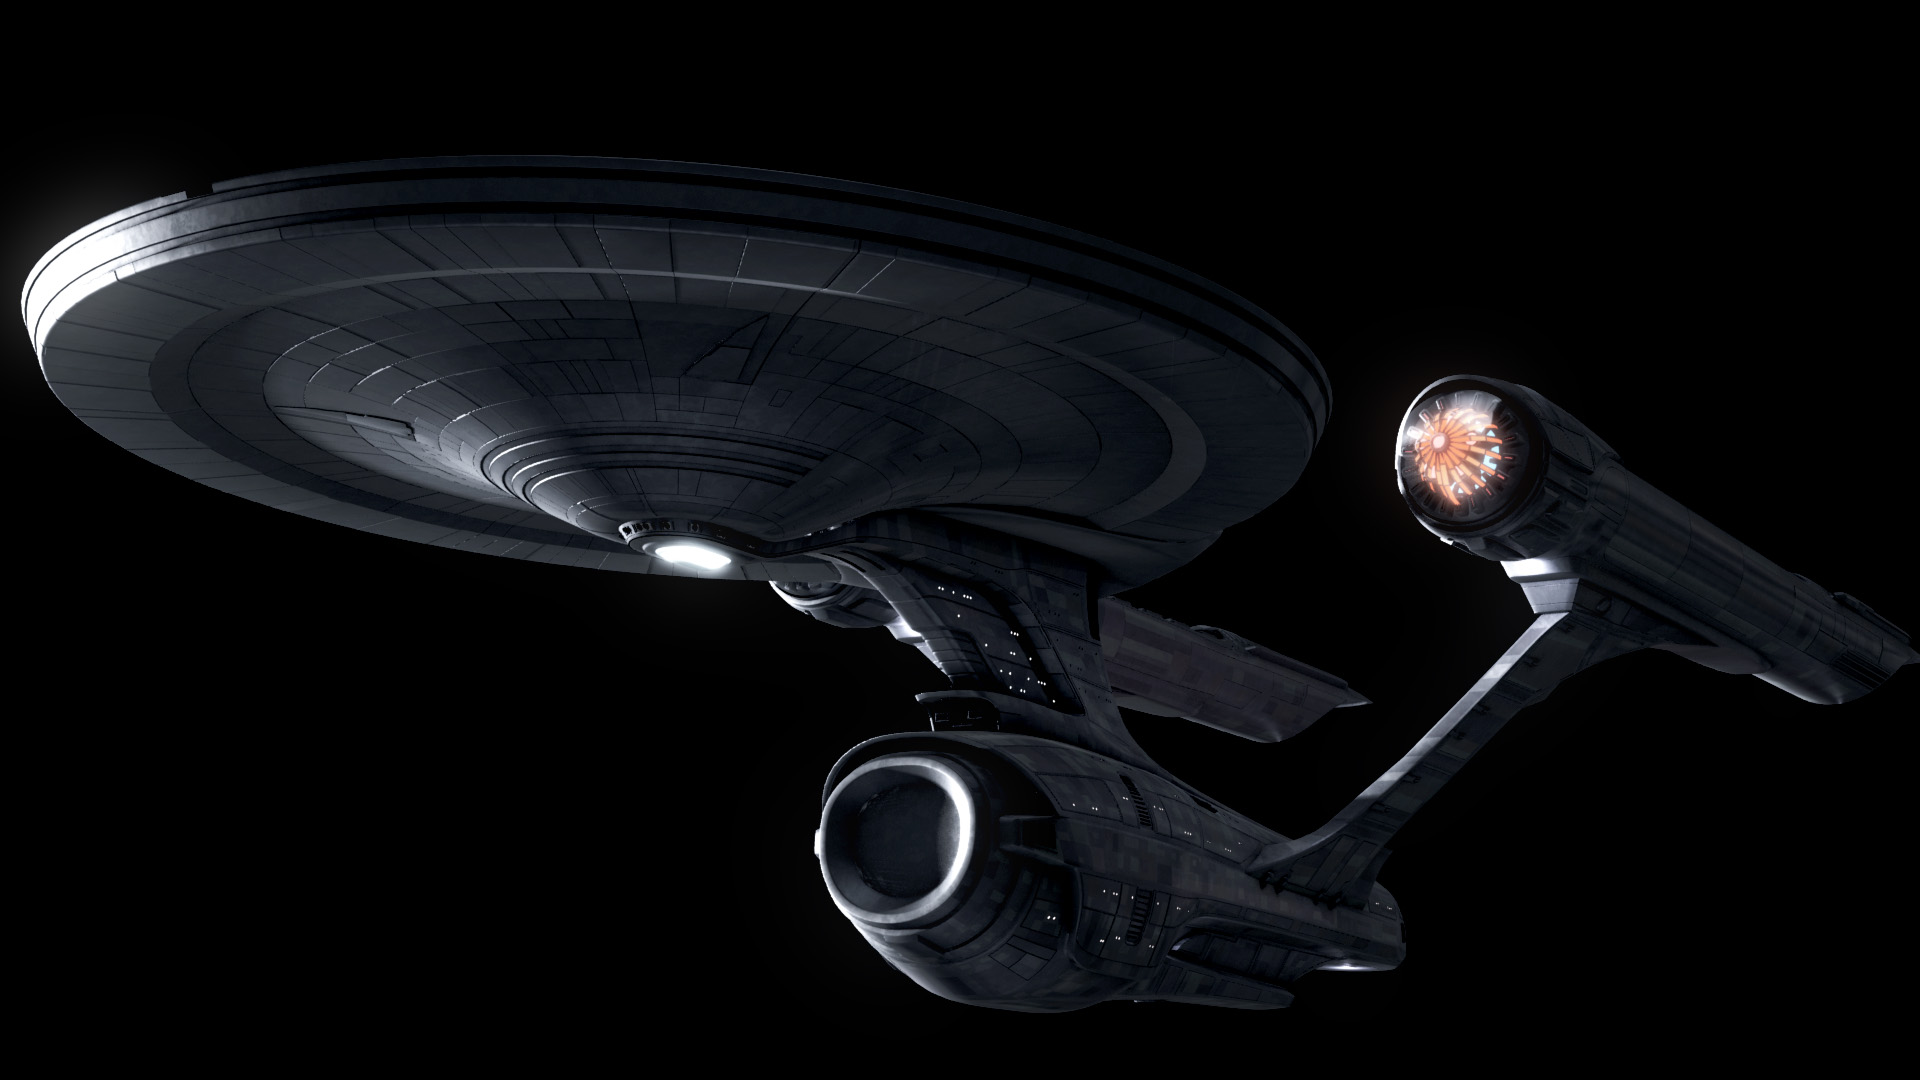 The Following Are STILL Not New Movie Enterprise Images – TrekMovie.com